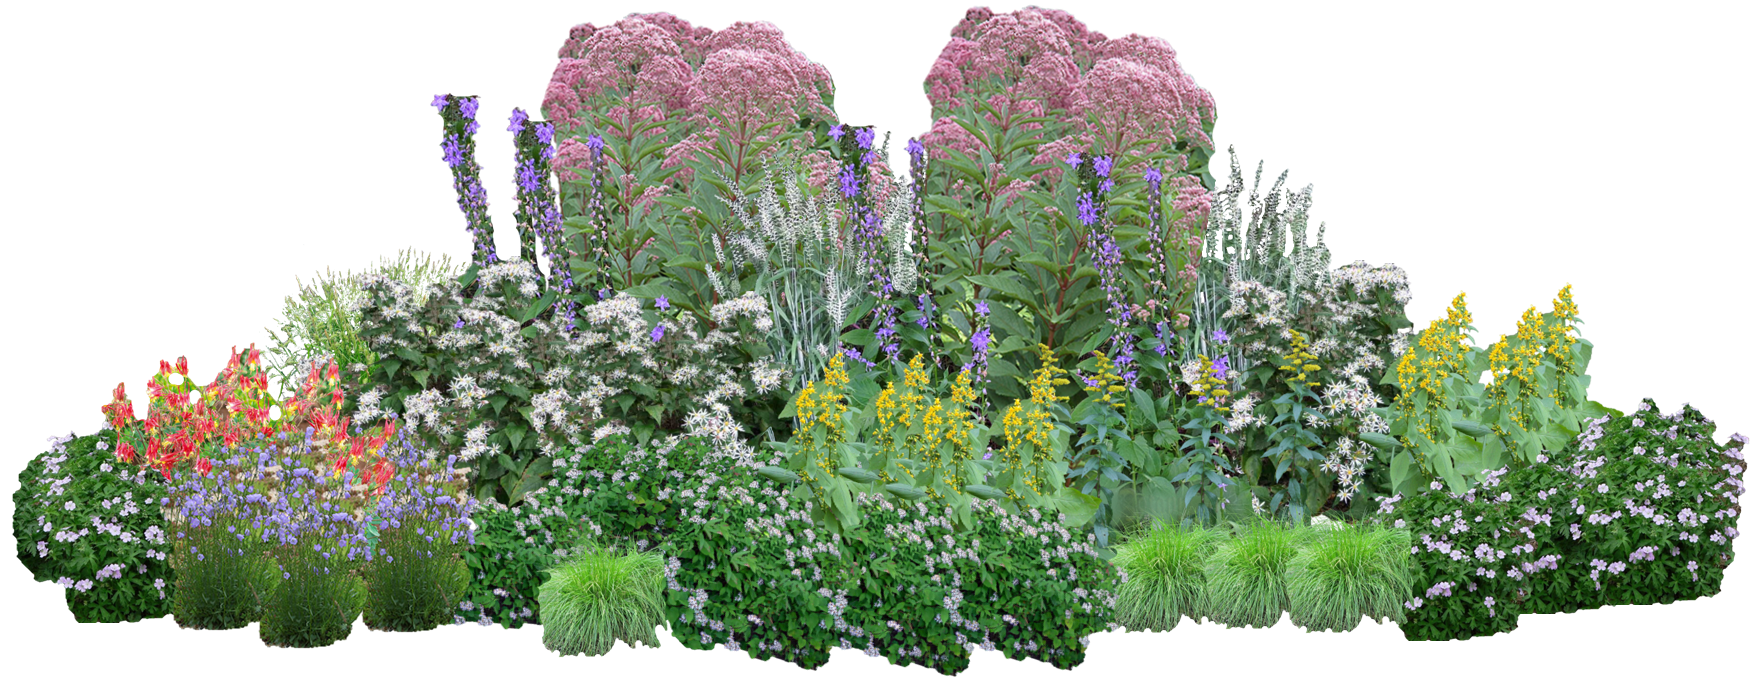 Goldenrod Gala Perennial Native Plants Collection [96 plants]